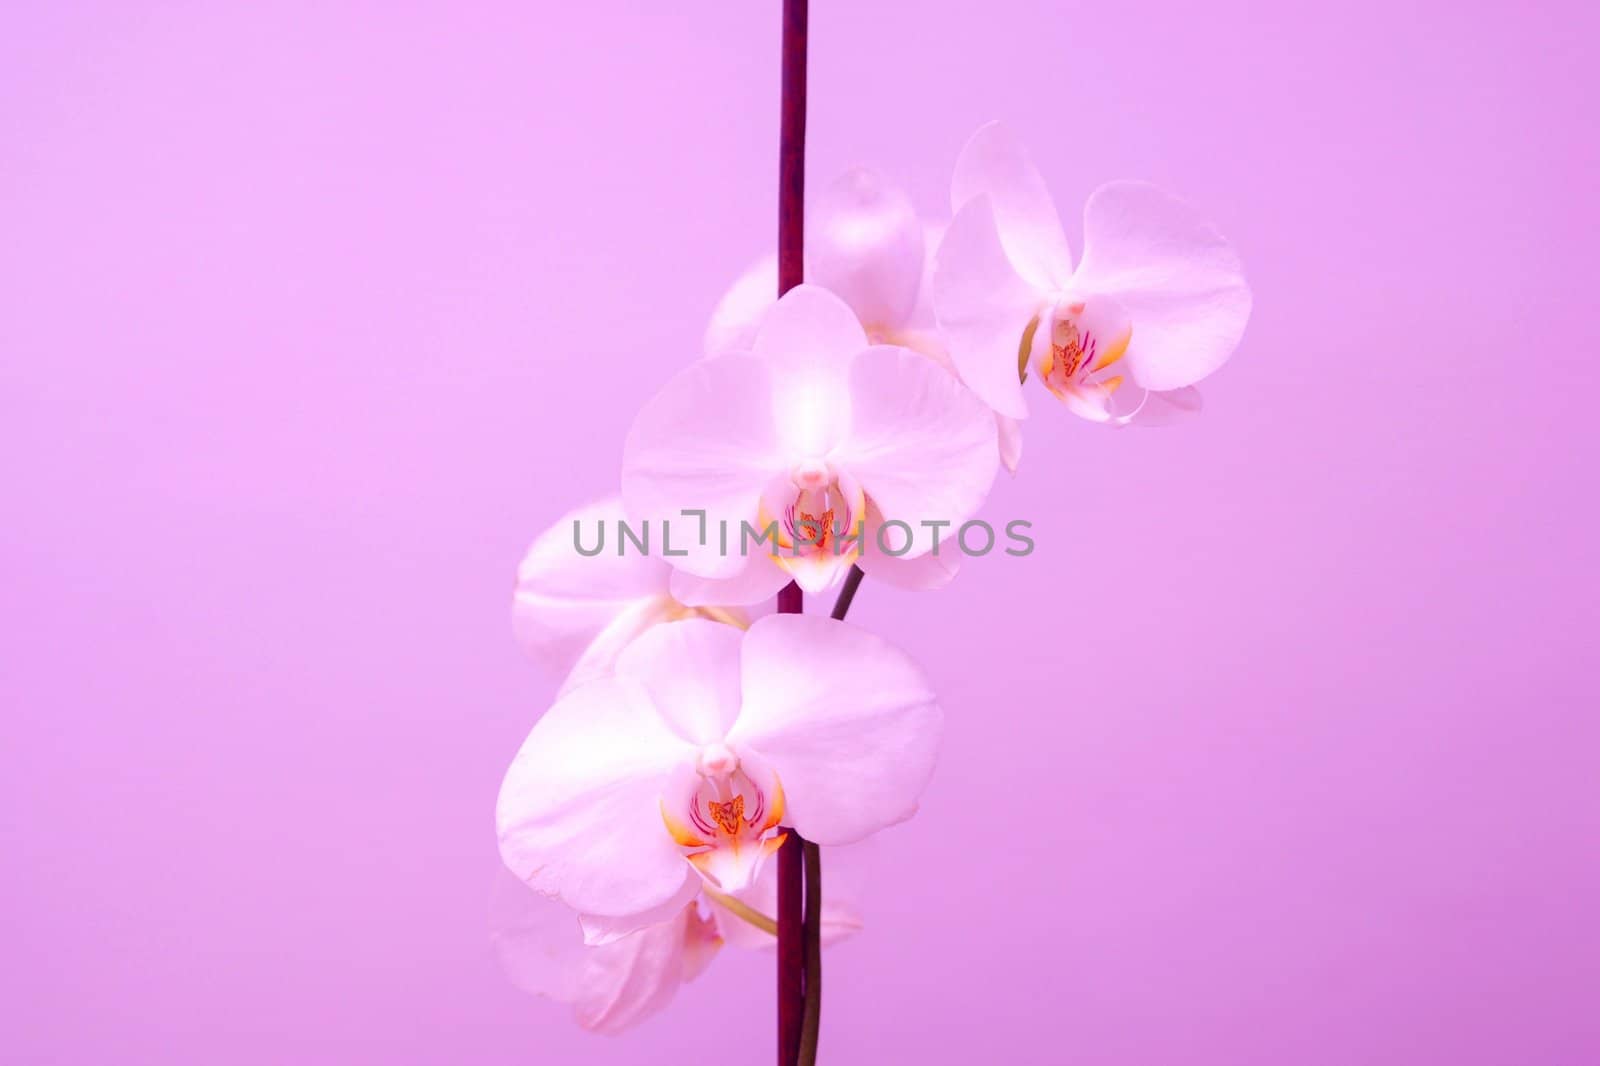 An orchid flower on the pink background